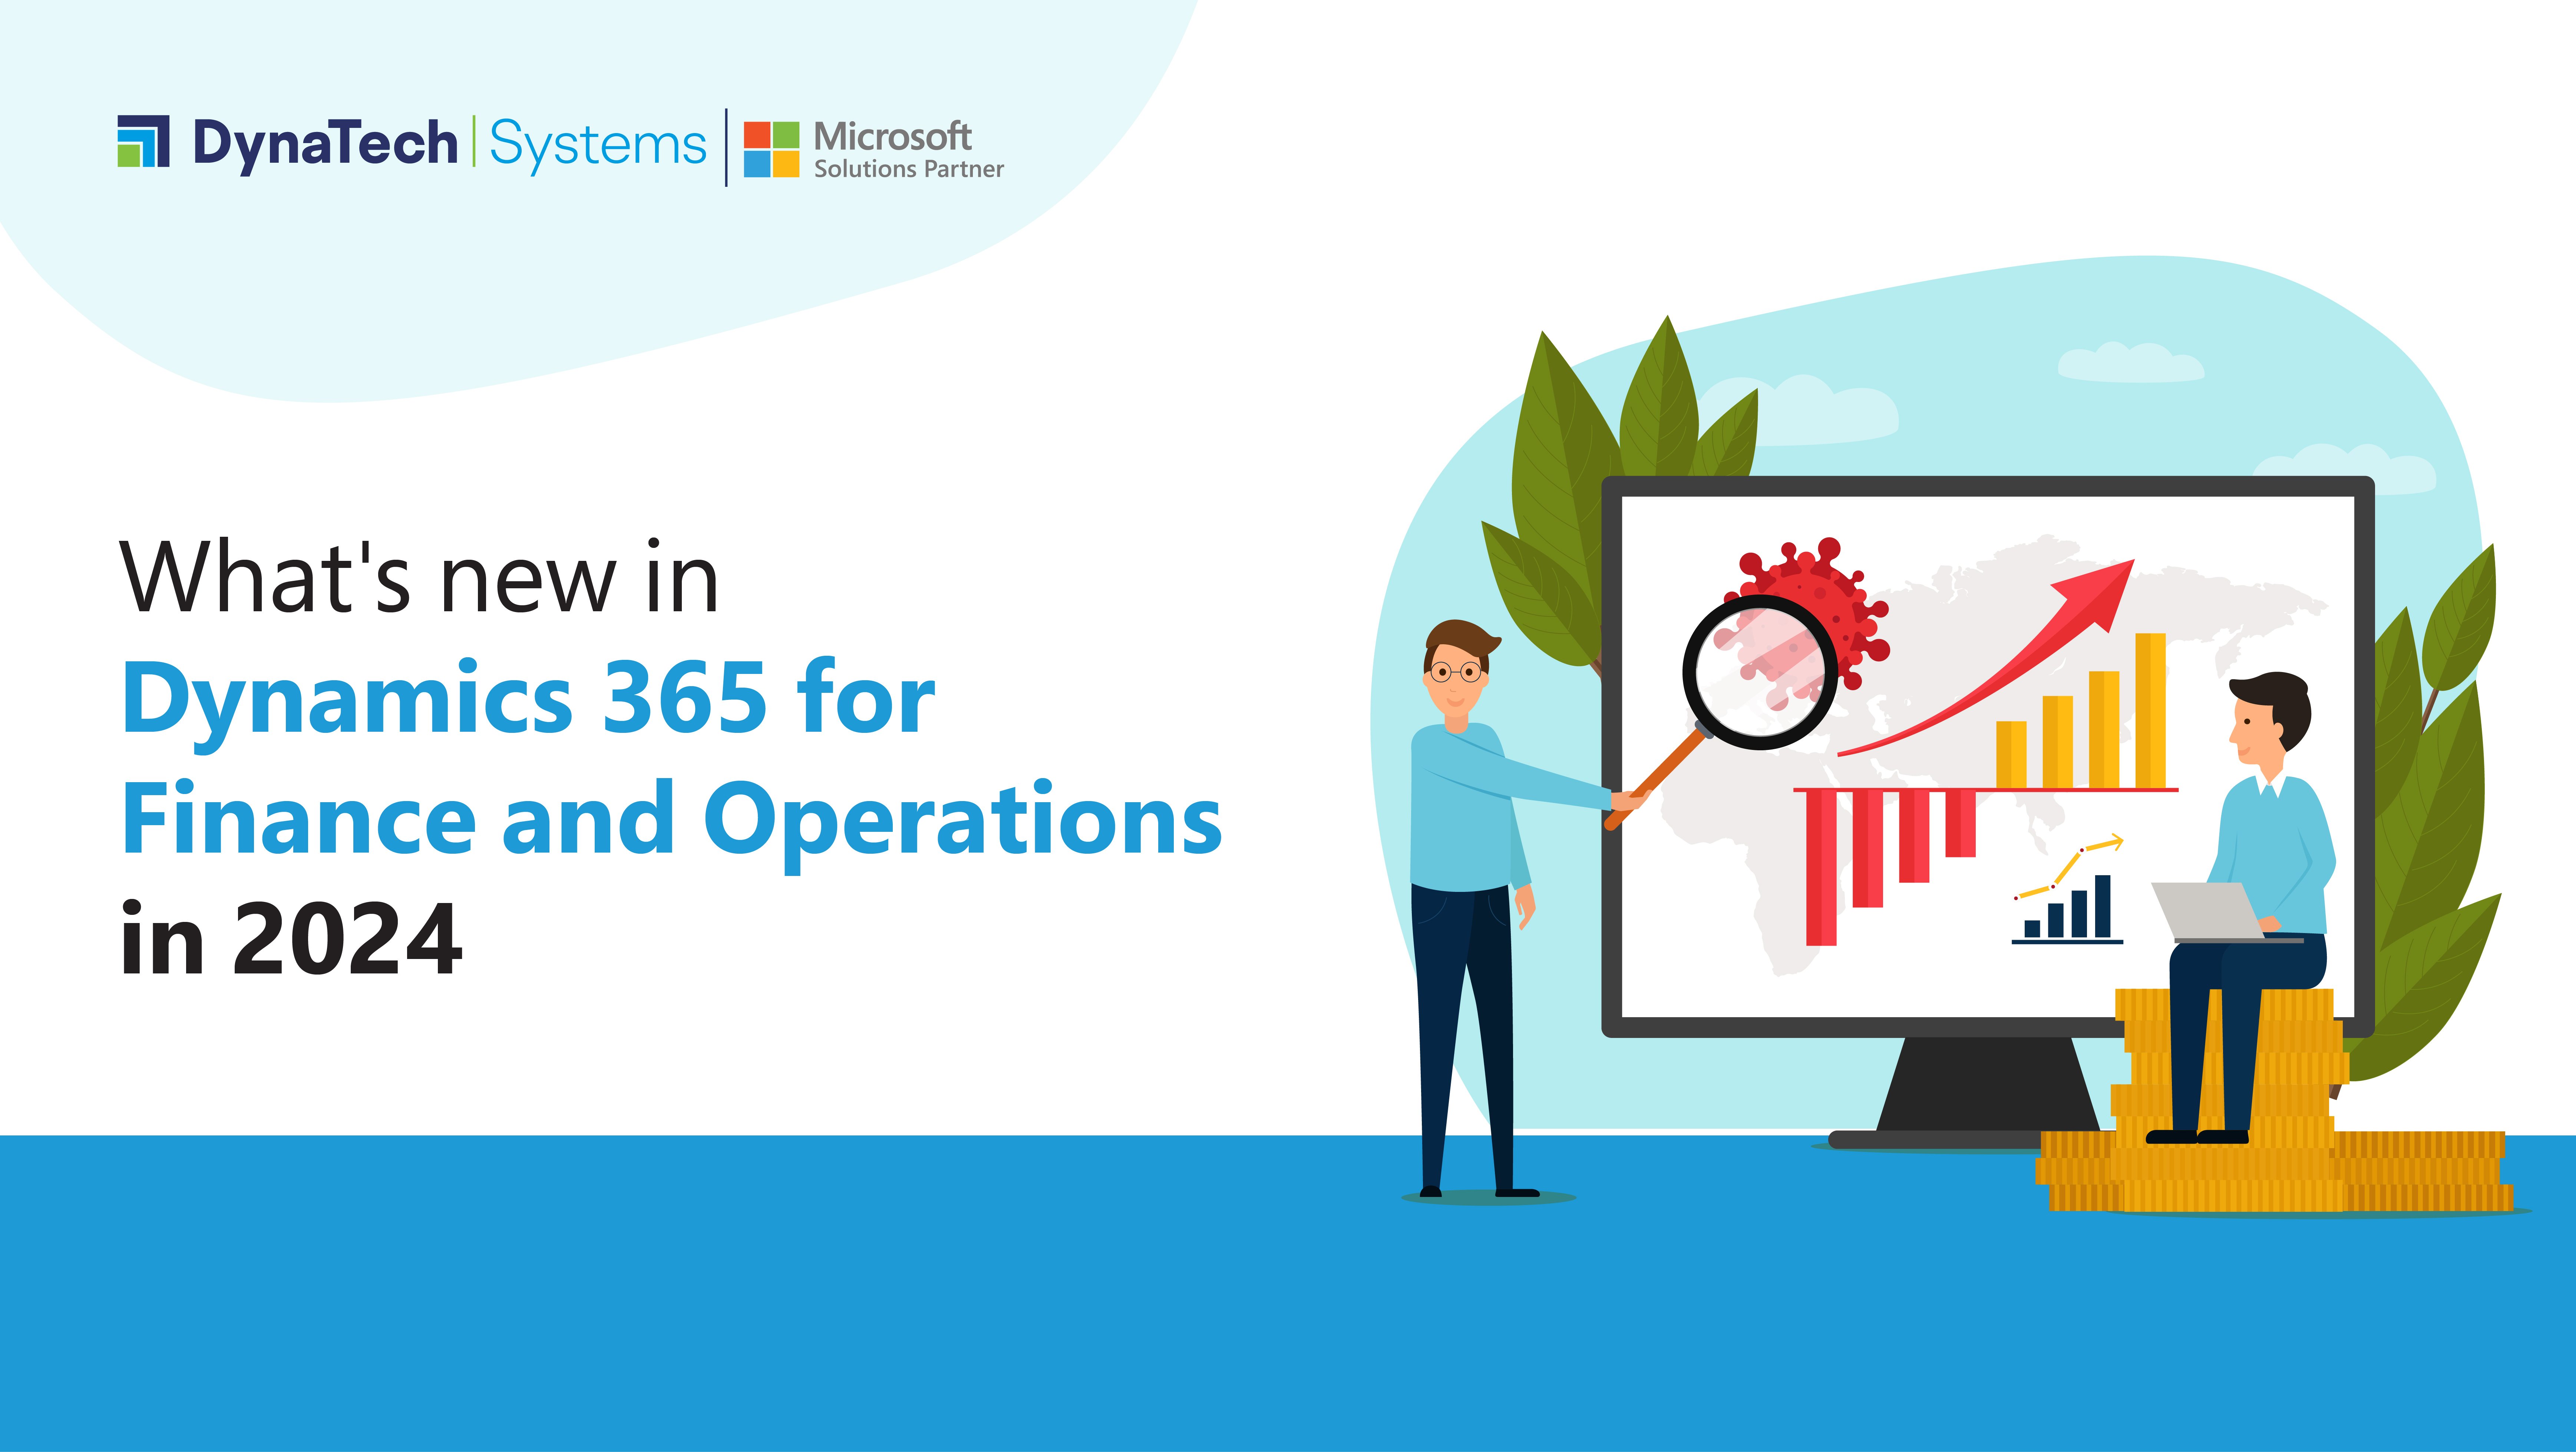 What's new in Dynamics 365 for Finance and Operations in 2024